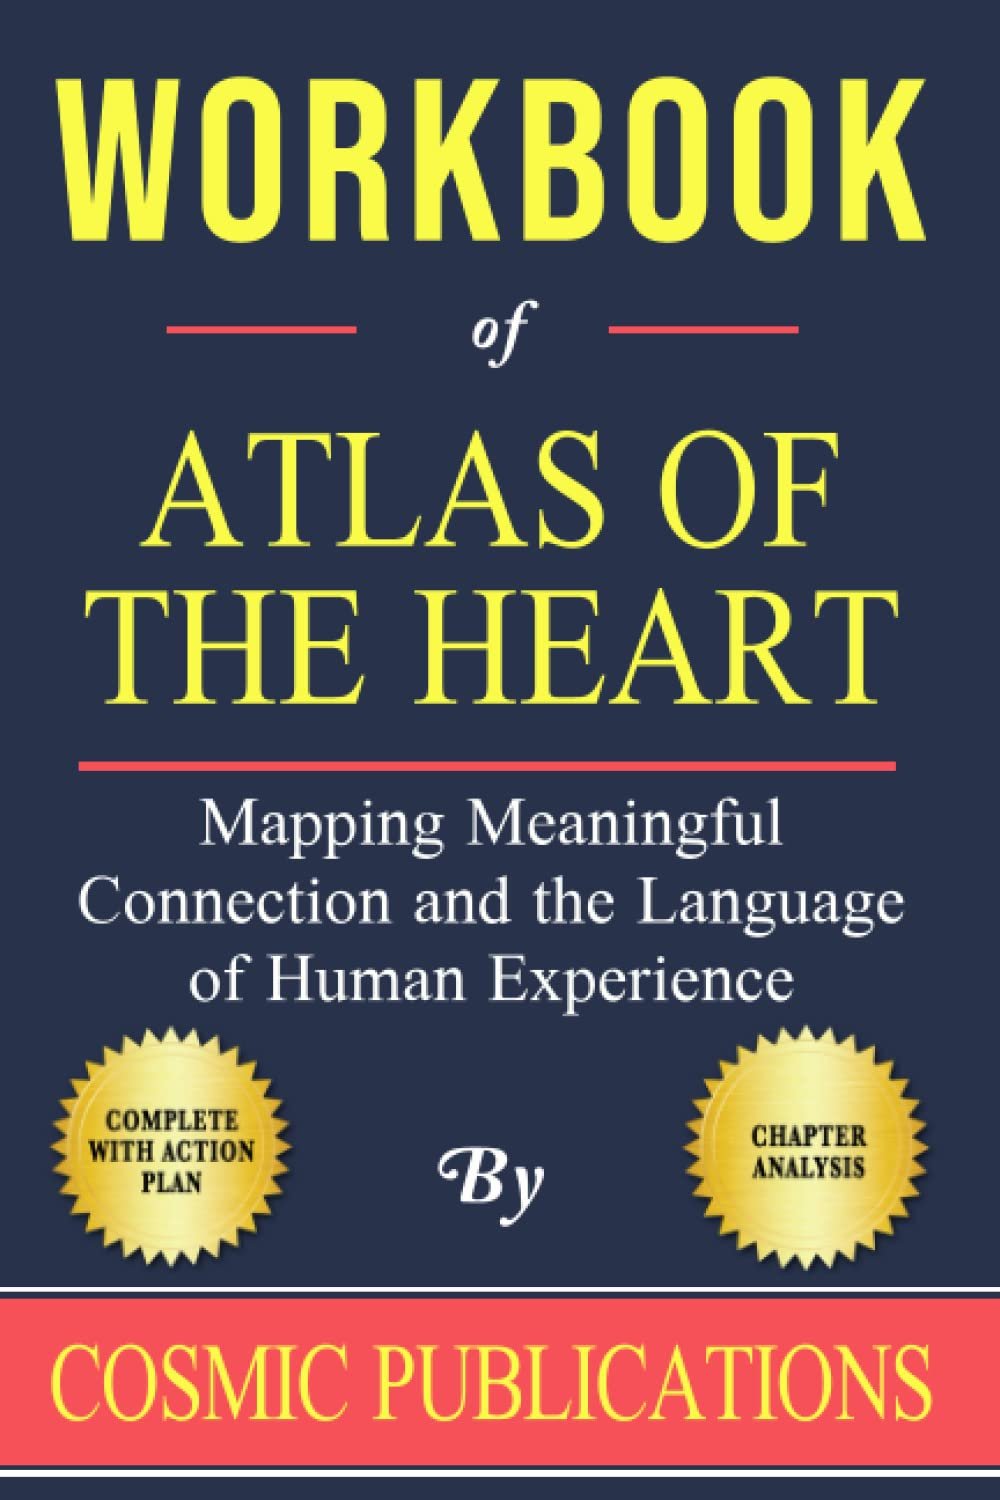 Workbook: Atlas of the Heart by Brené Brown: Mapping Meaningful Connection and the Language of Human Experience